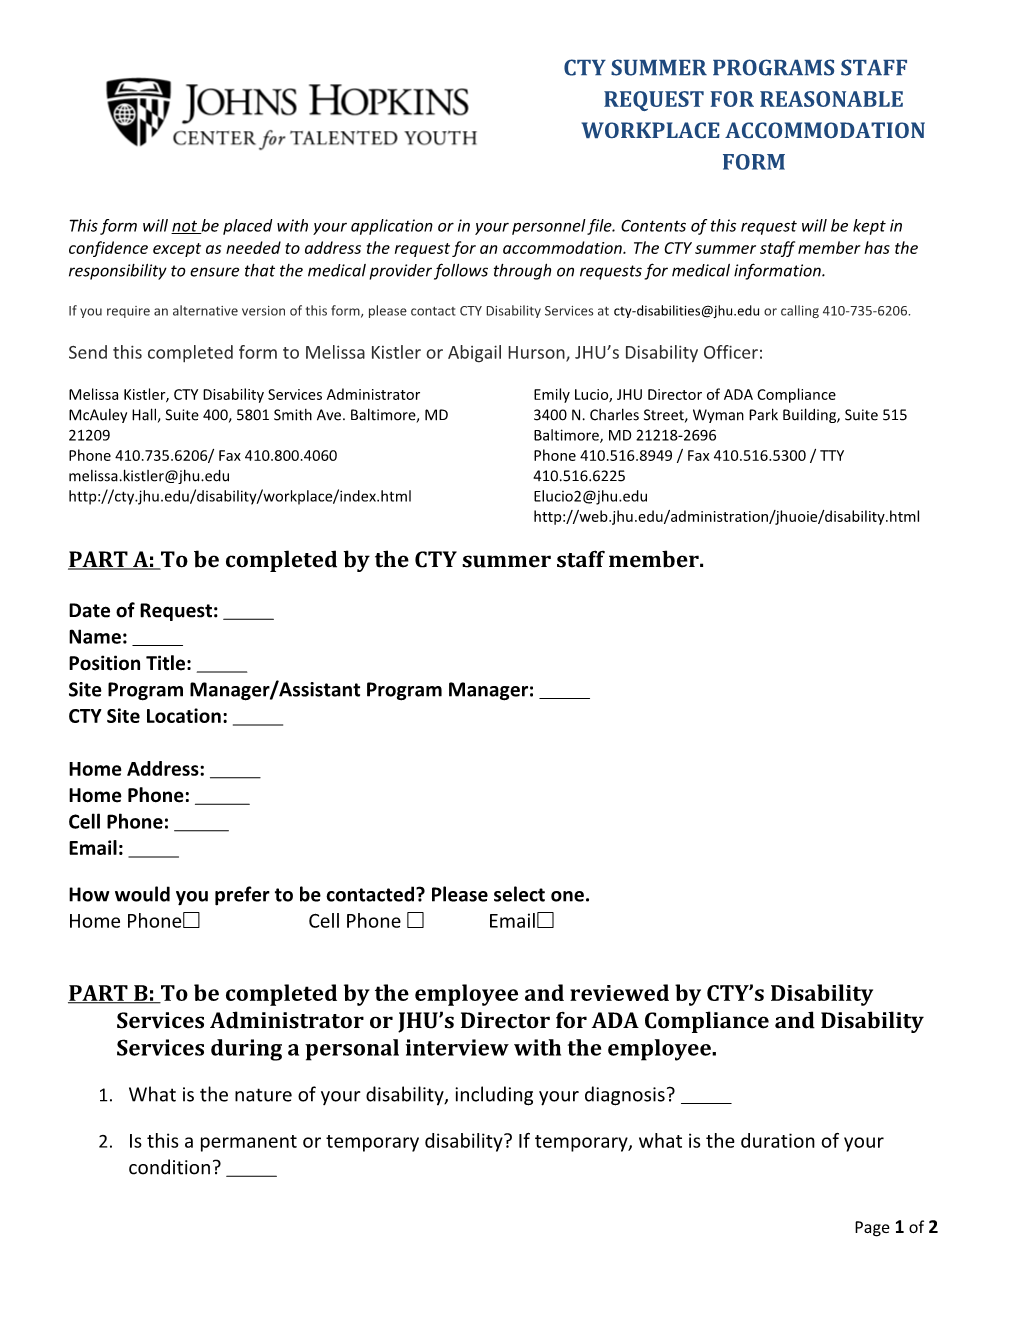 Cty Summer Programs Staff Request for Reasonable Workplace Accommodation Form